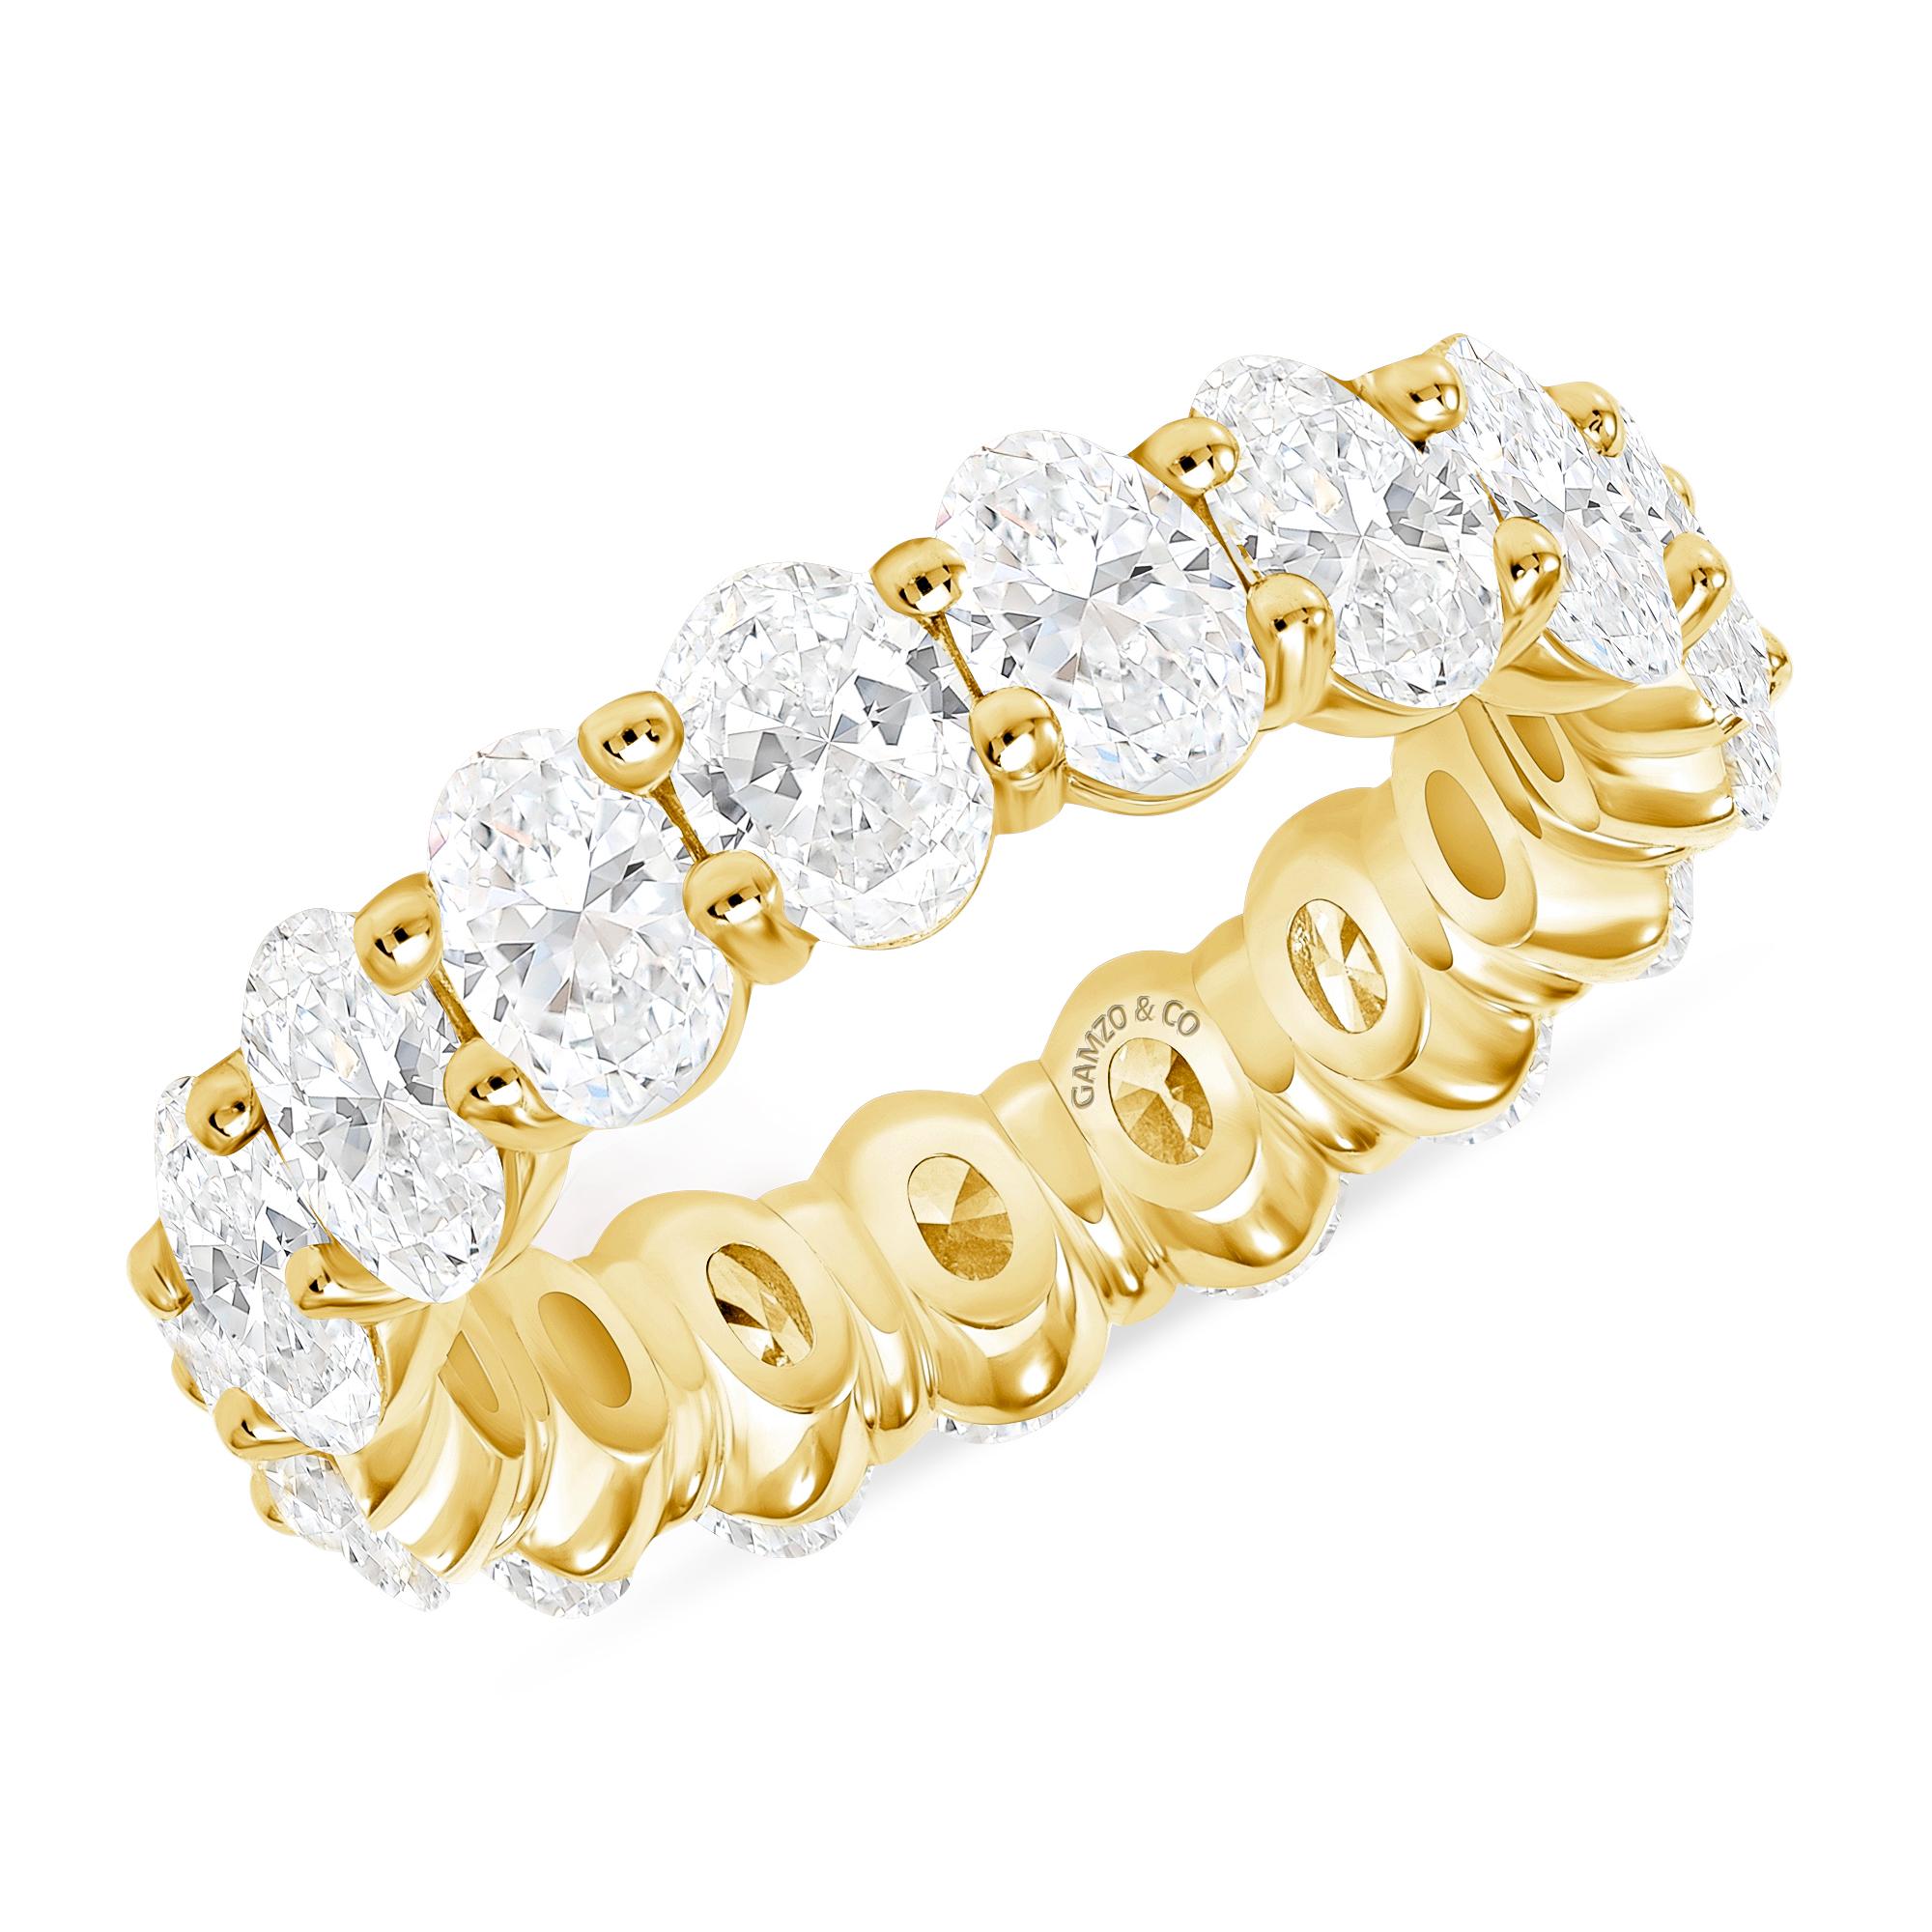 For Sale:  18k Yellow Gold 5 Carat Oval Cut Natural Diamond Eternity Ring